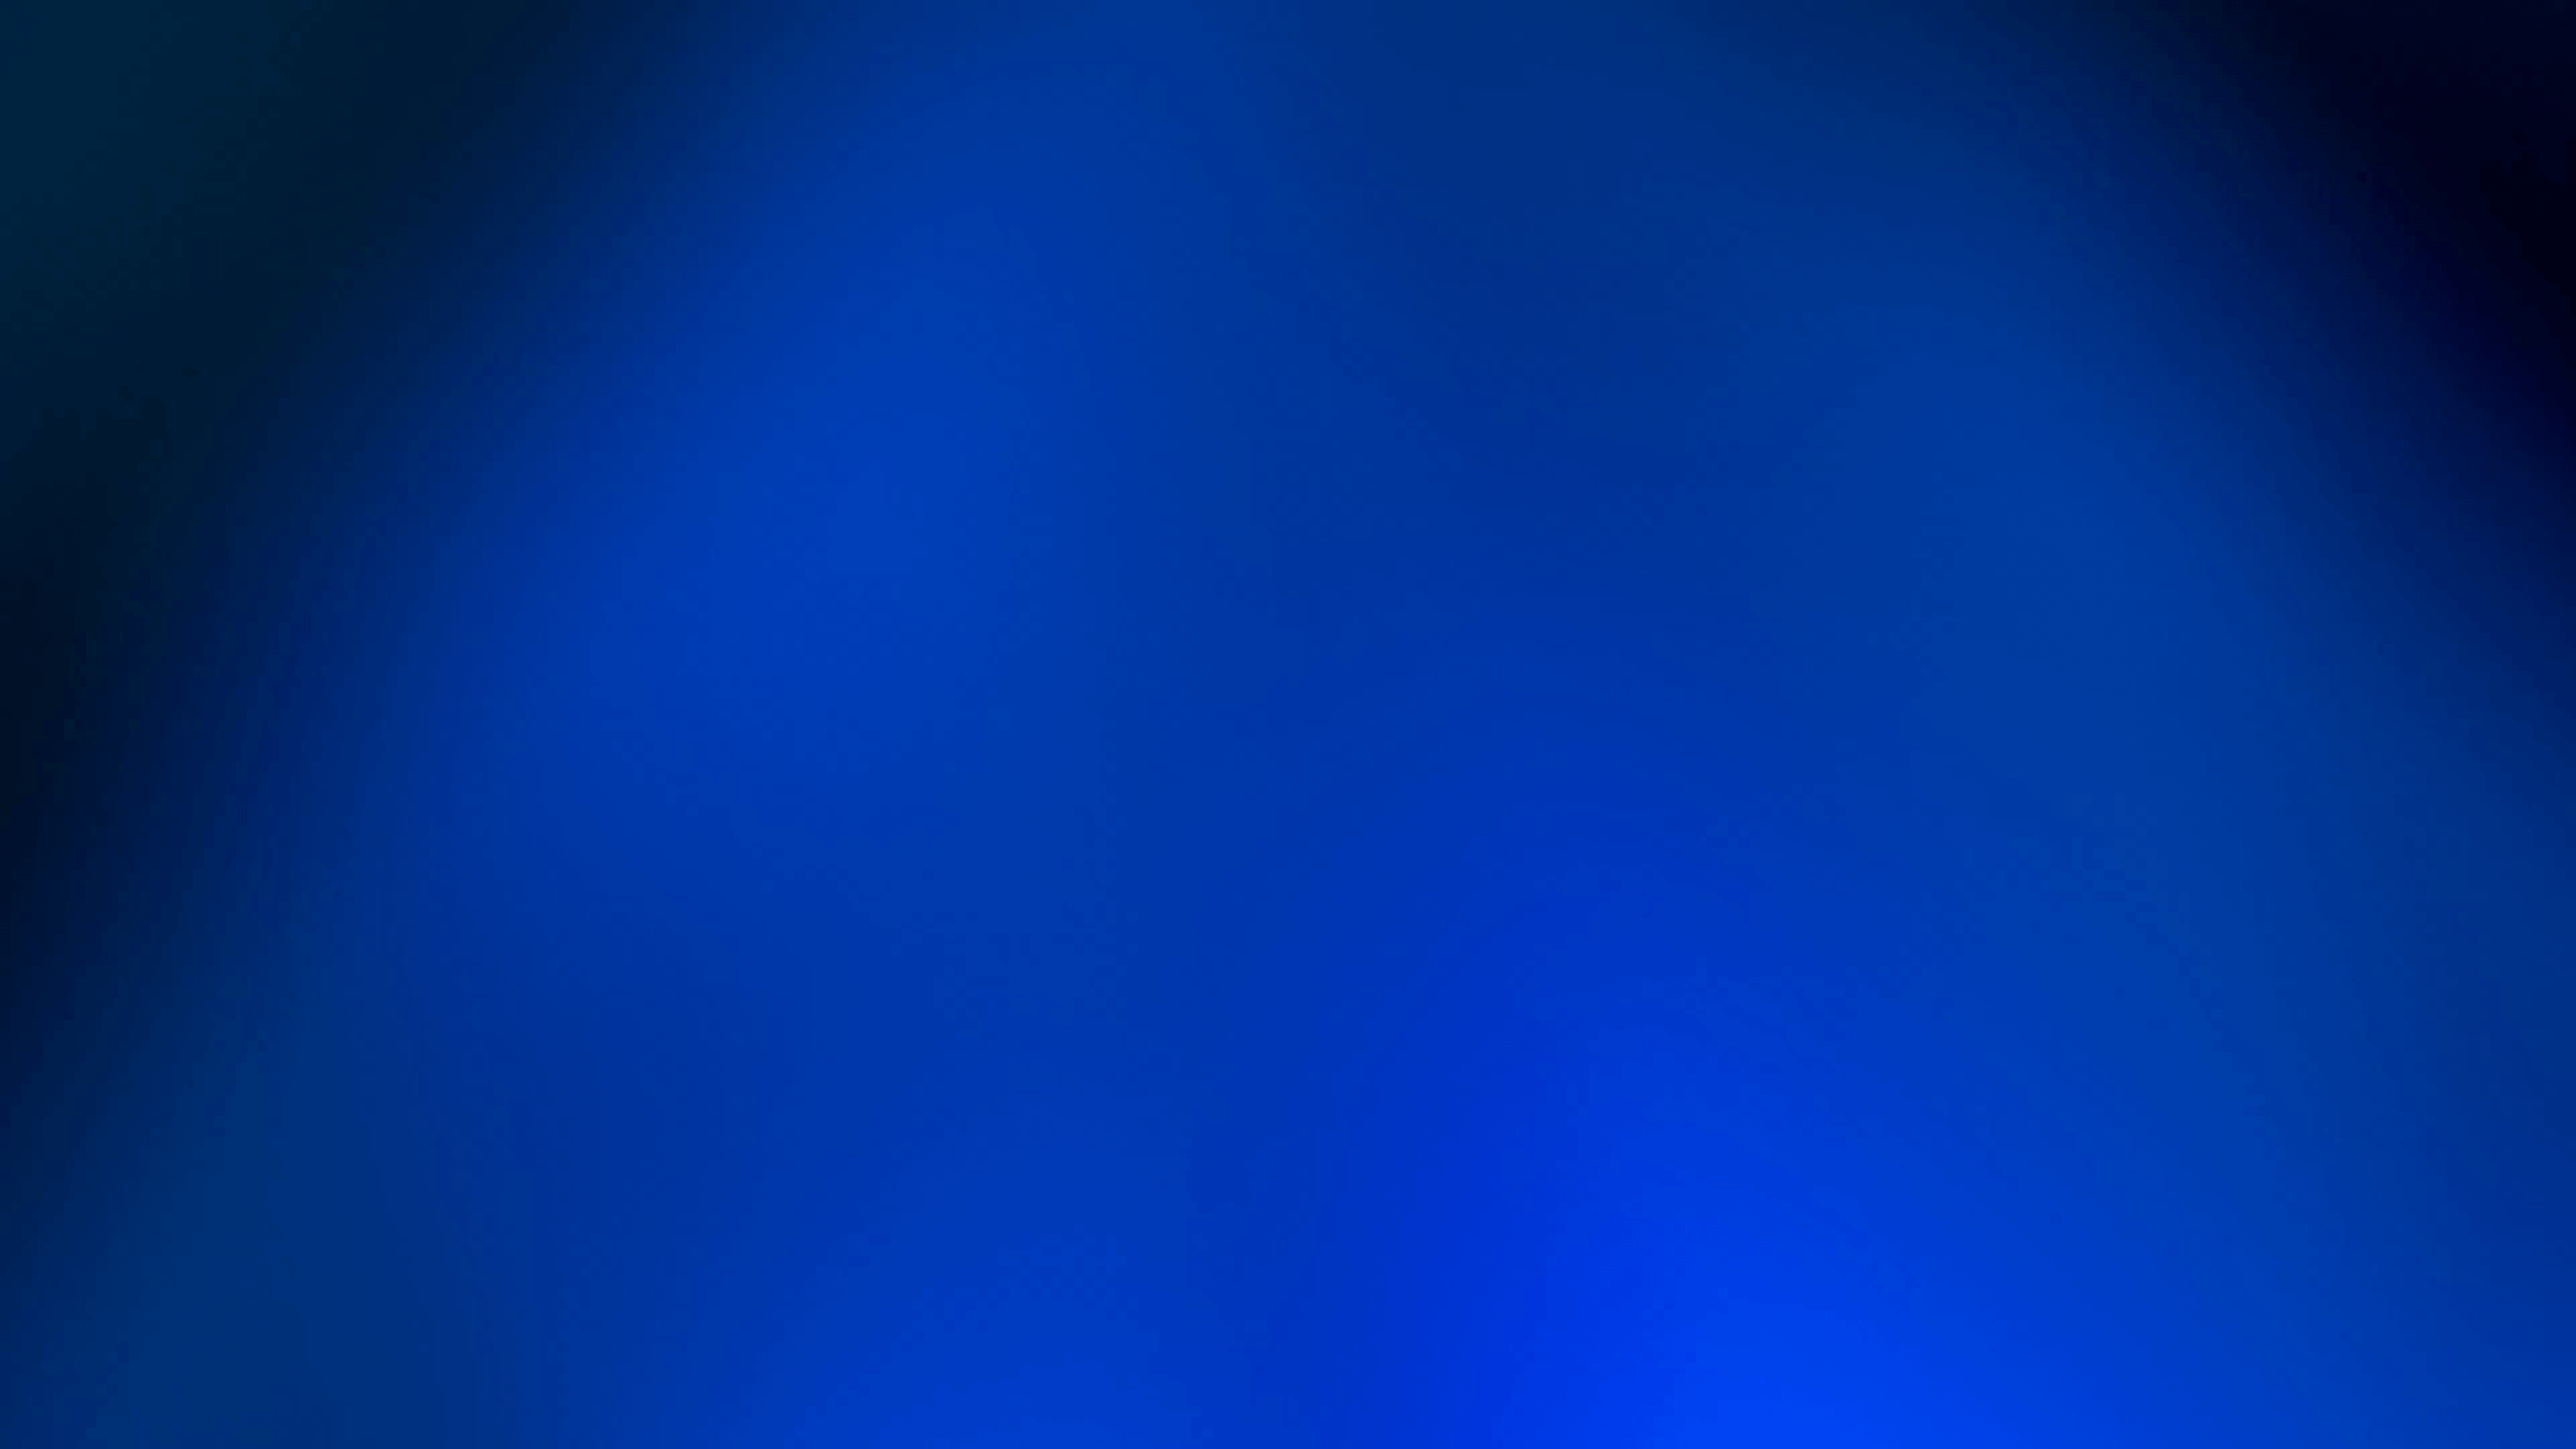 Dark Blue Abstract Backgrounds - Wallpaper Cave